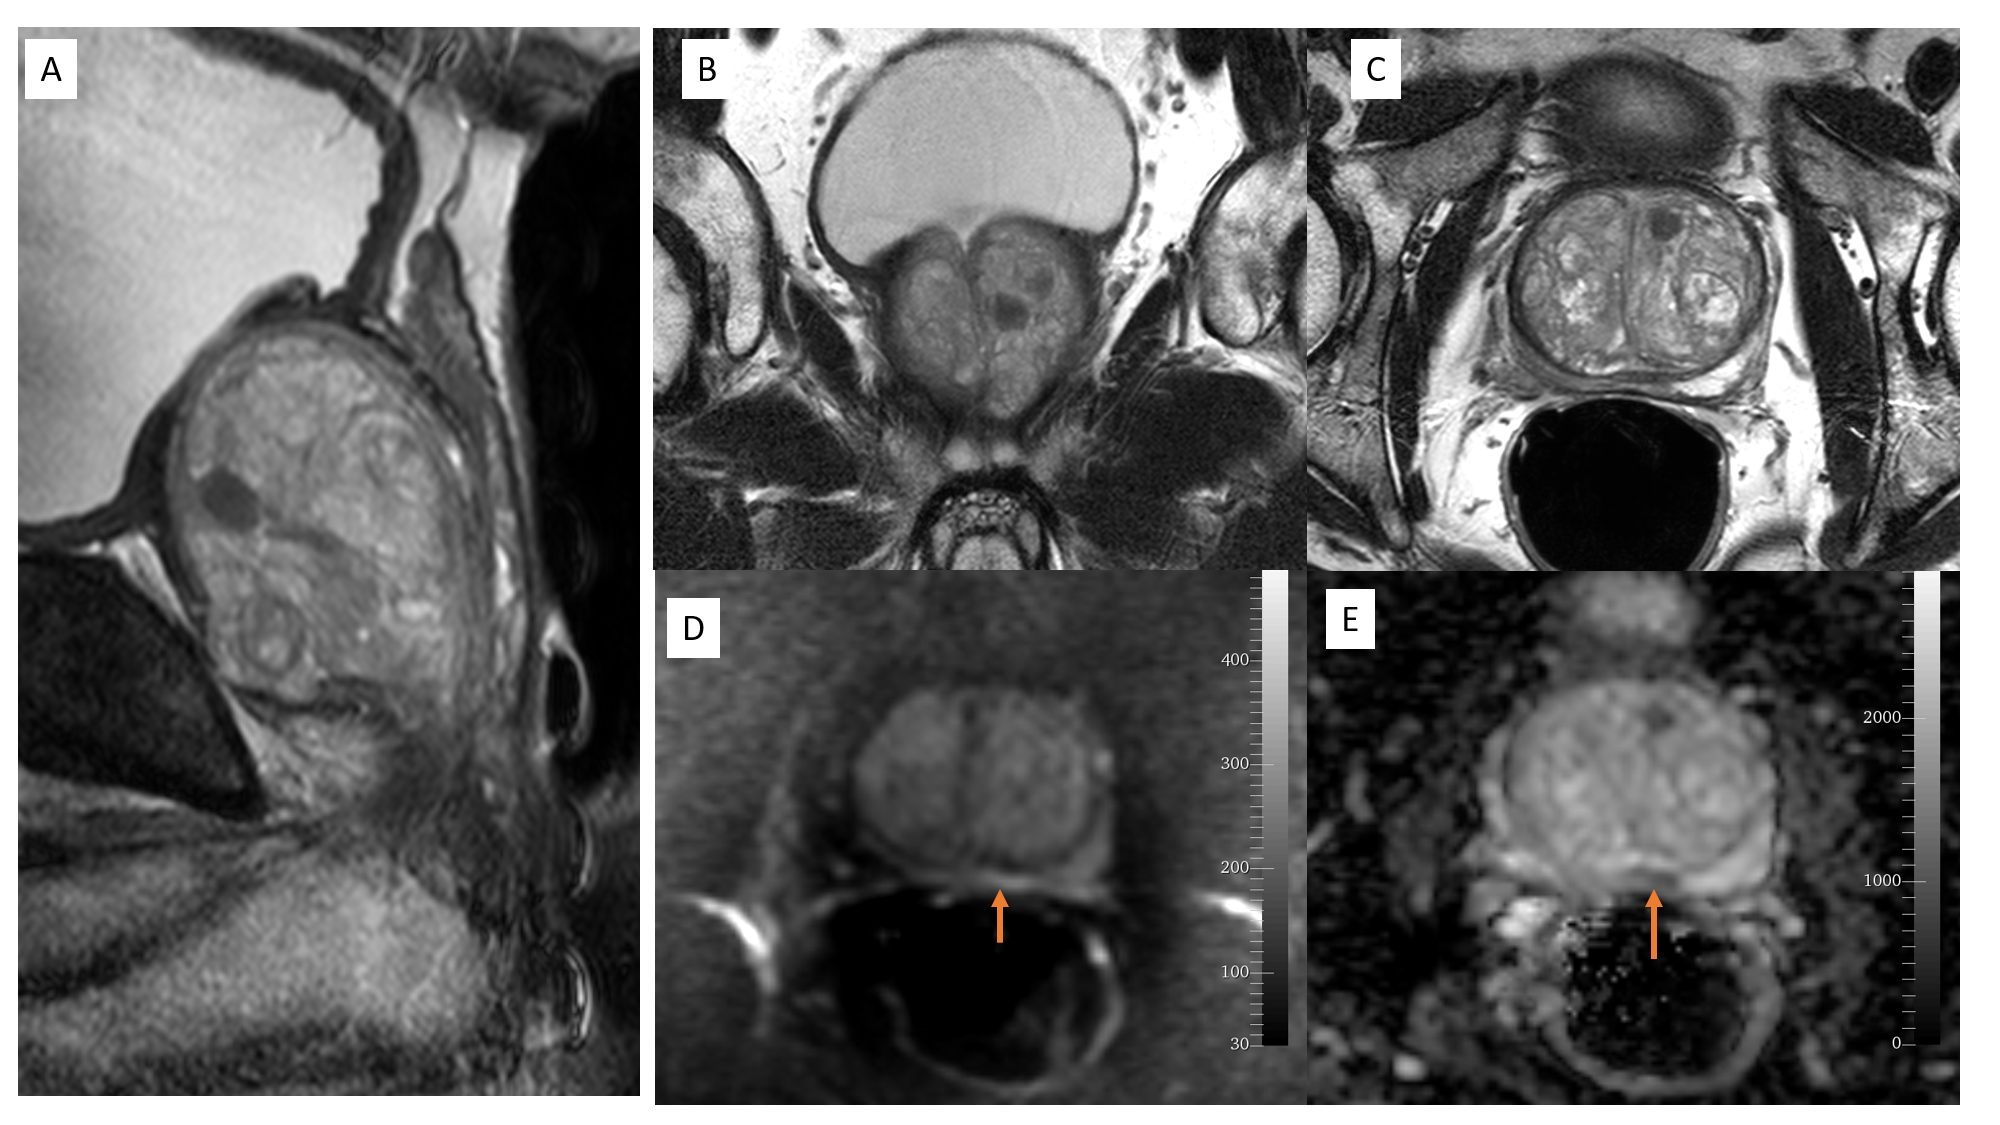 MRI Prostate: PIRADS- 2; A: Sagittal T2, B: Coronal T2, C: Axial T2, D: DW, E: ADC;
An ill - defined lesion in the peripheral zone; shows faintly hyperintensity on DW and suppressed faintly on ADC (restricted diffusion)